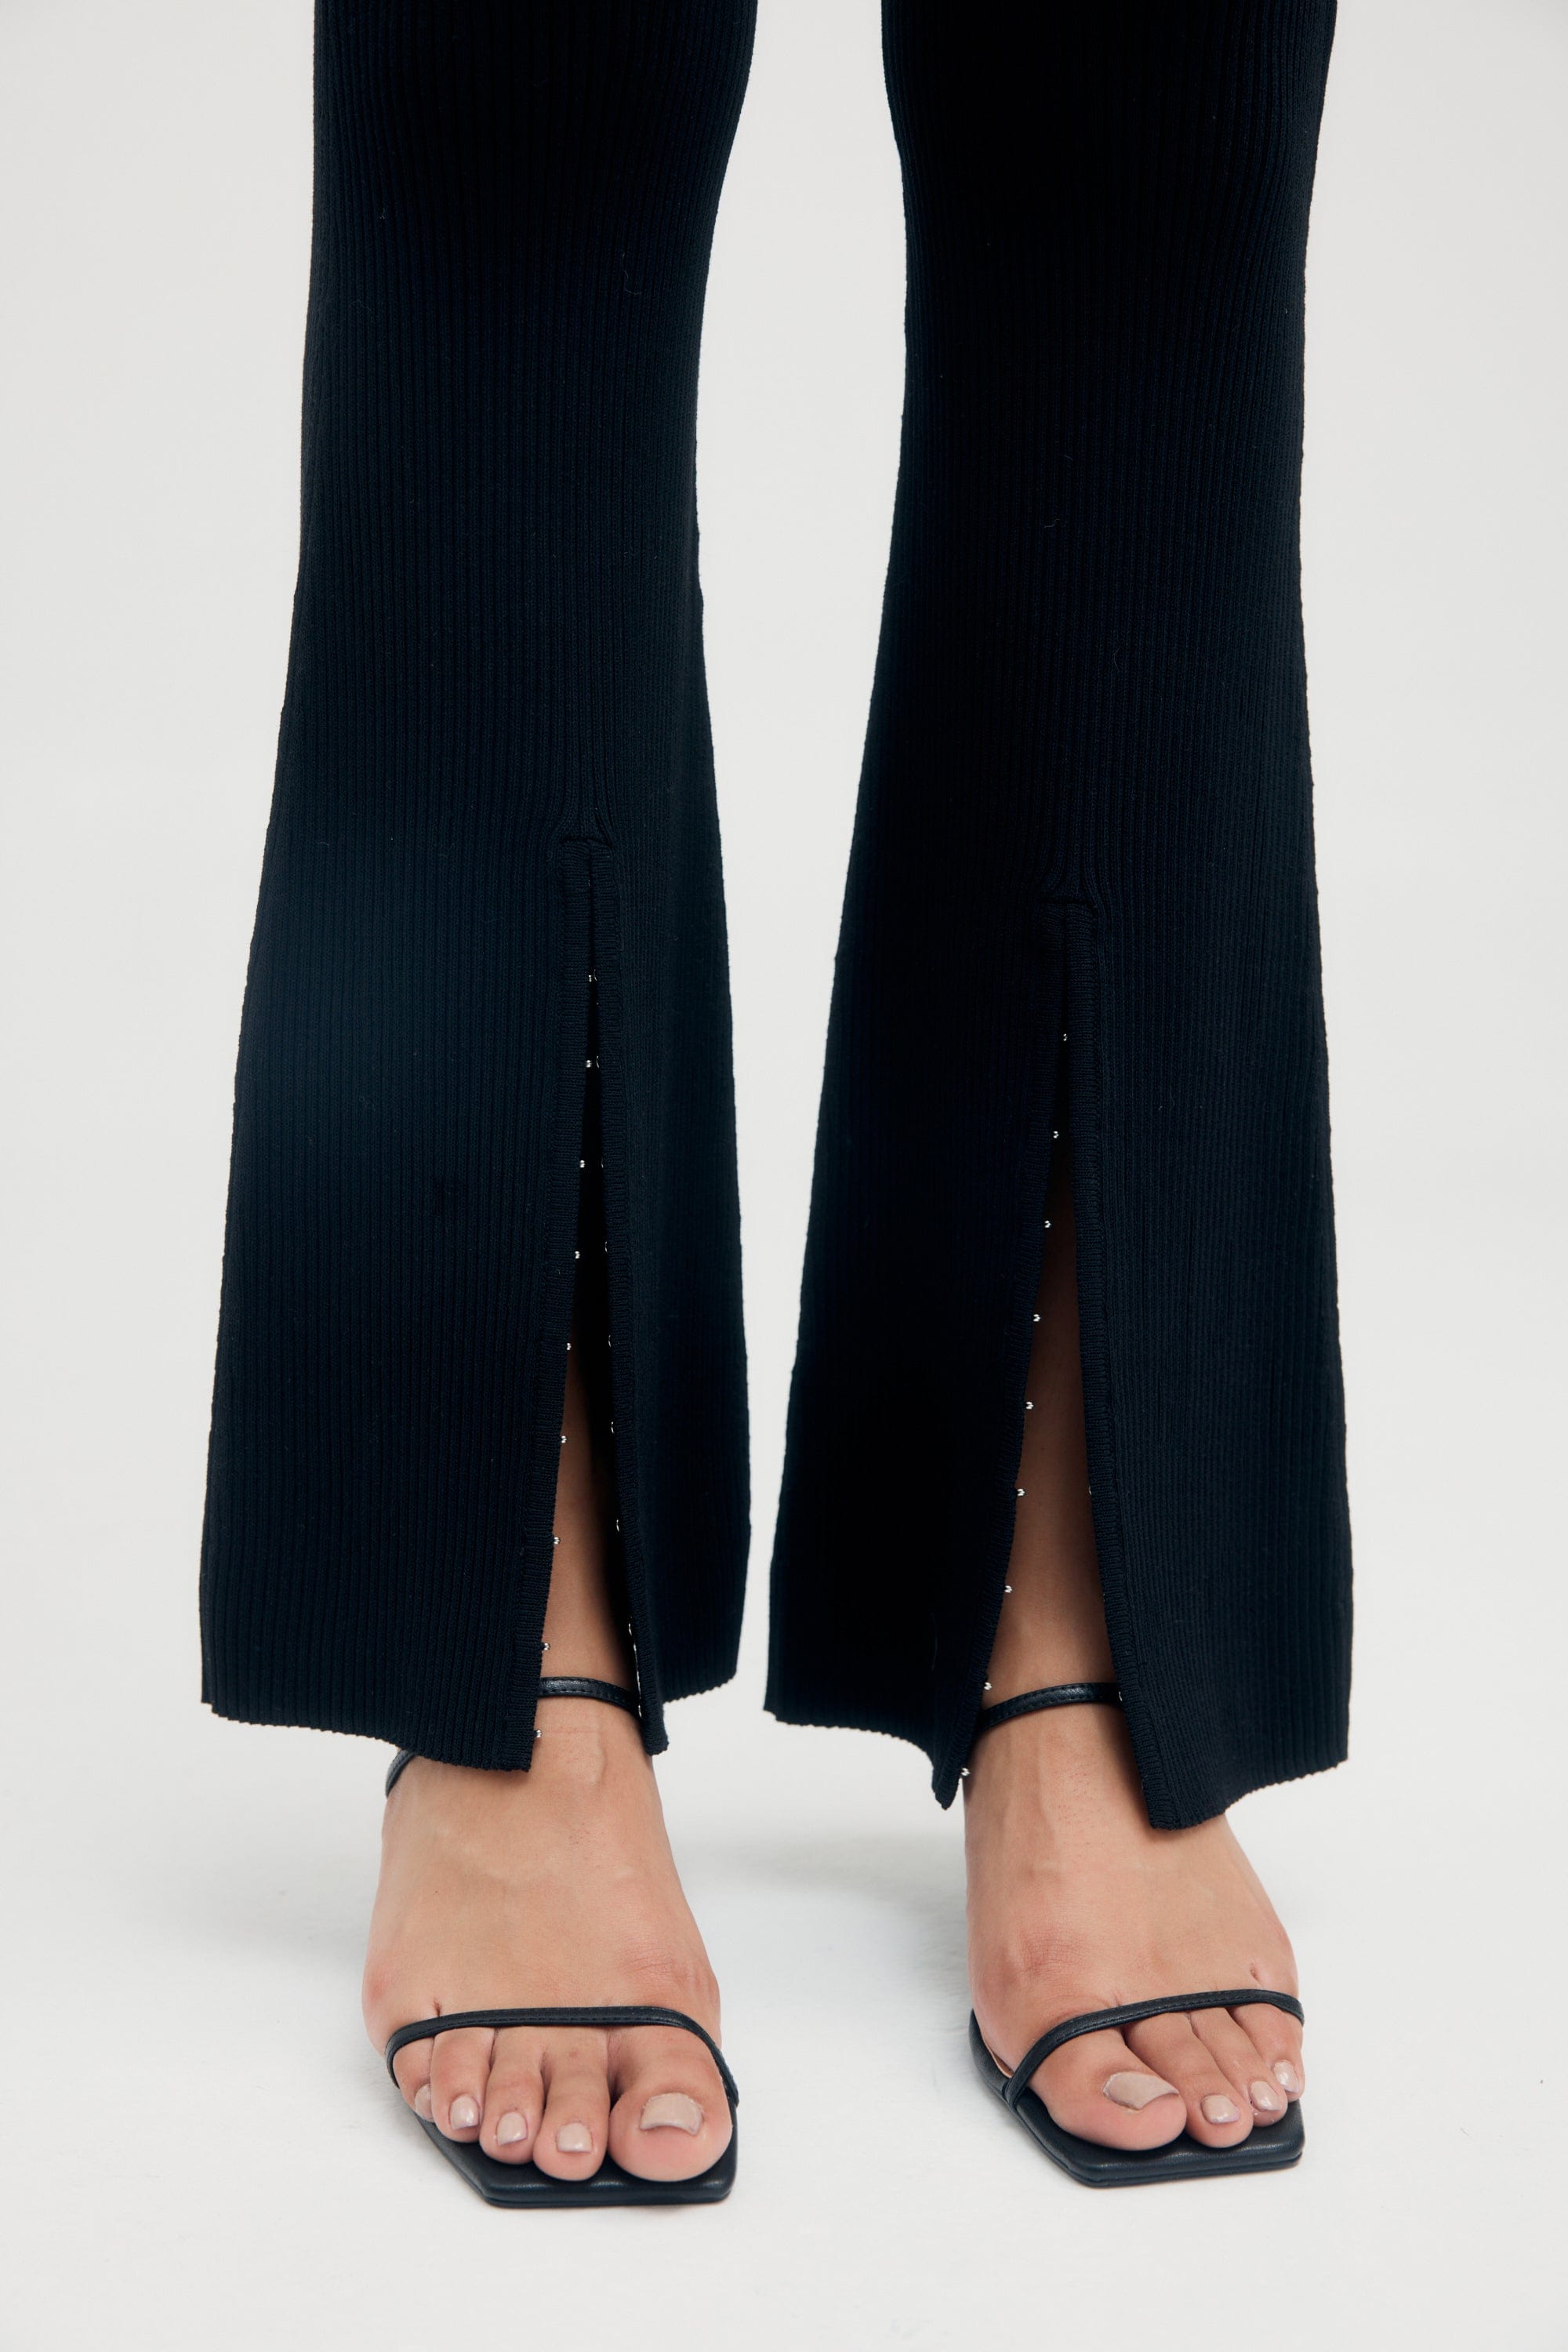 HOOKED IN KNIT FLARE PANT, ONYX, Third Form, Women's Fashion on Sale